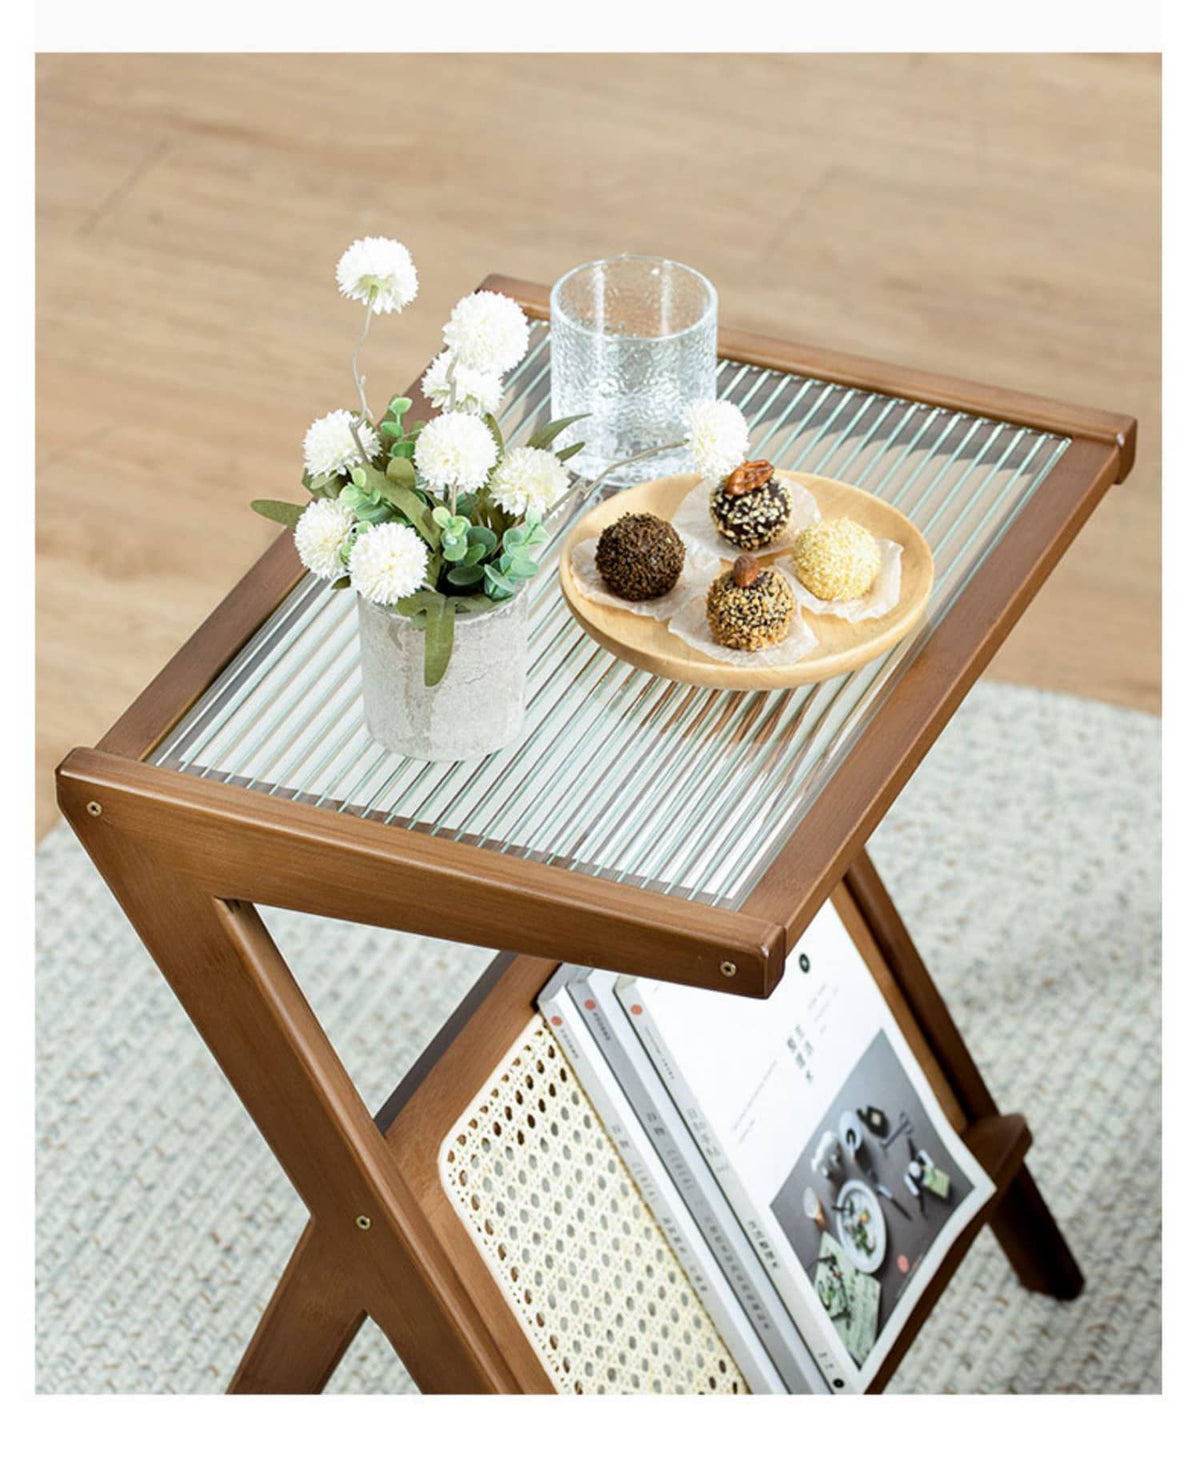 Elegant Natural Wood Tea Table with Reeded Glass – Brown, Grey & Dark Bamboo Styles hsl-76